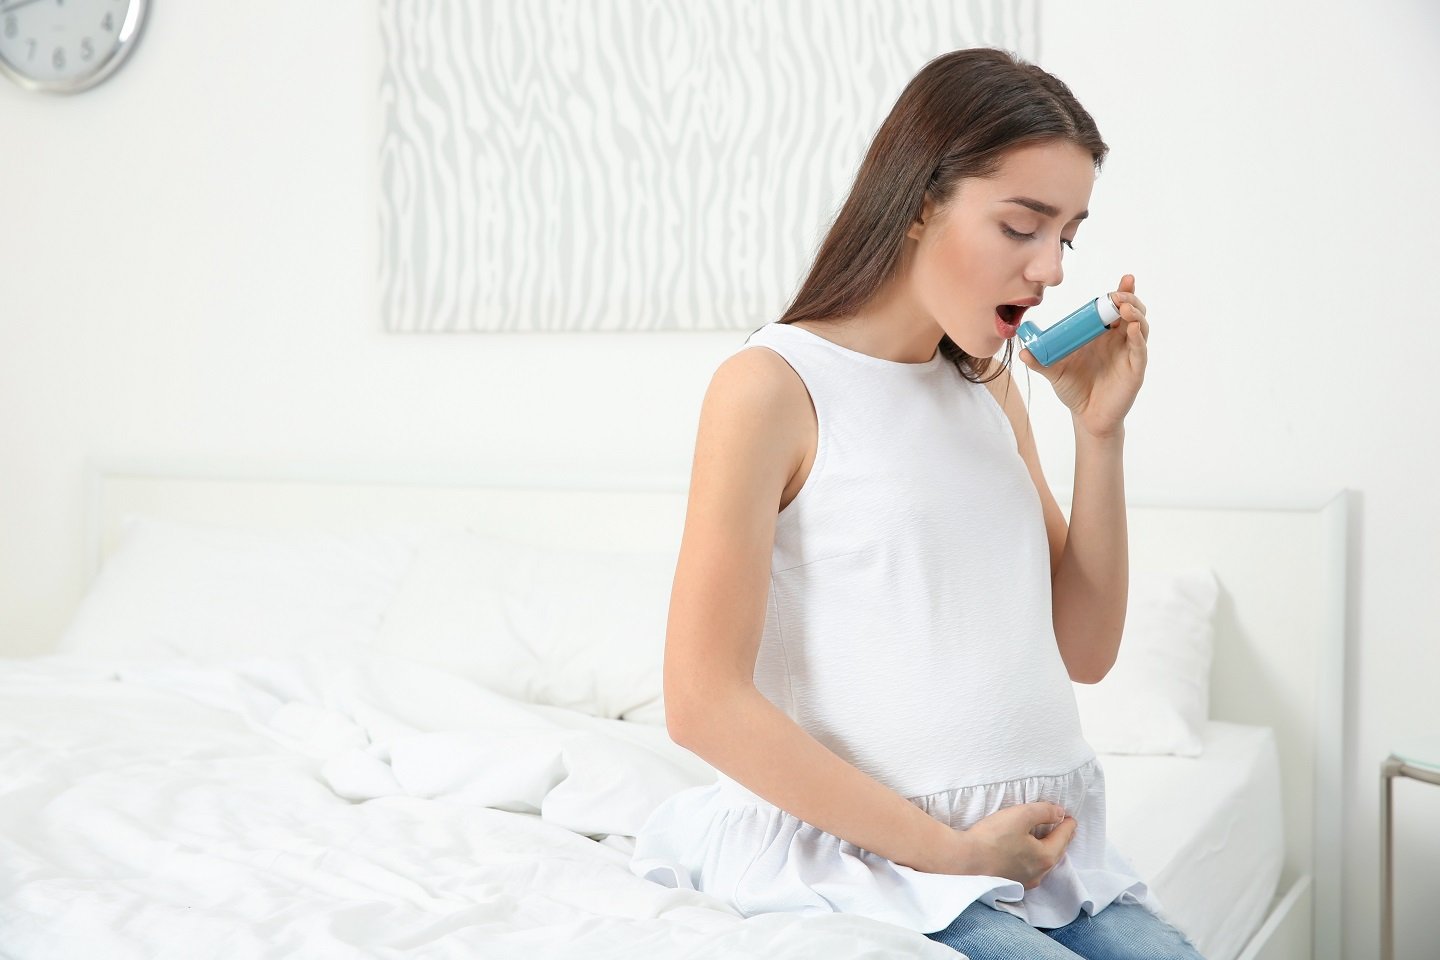 Asthma In Pregnancy: What To Do and What To Avoid